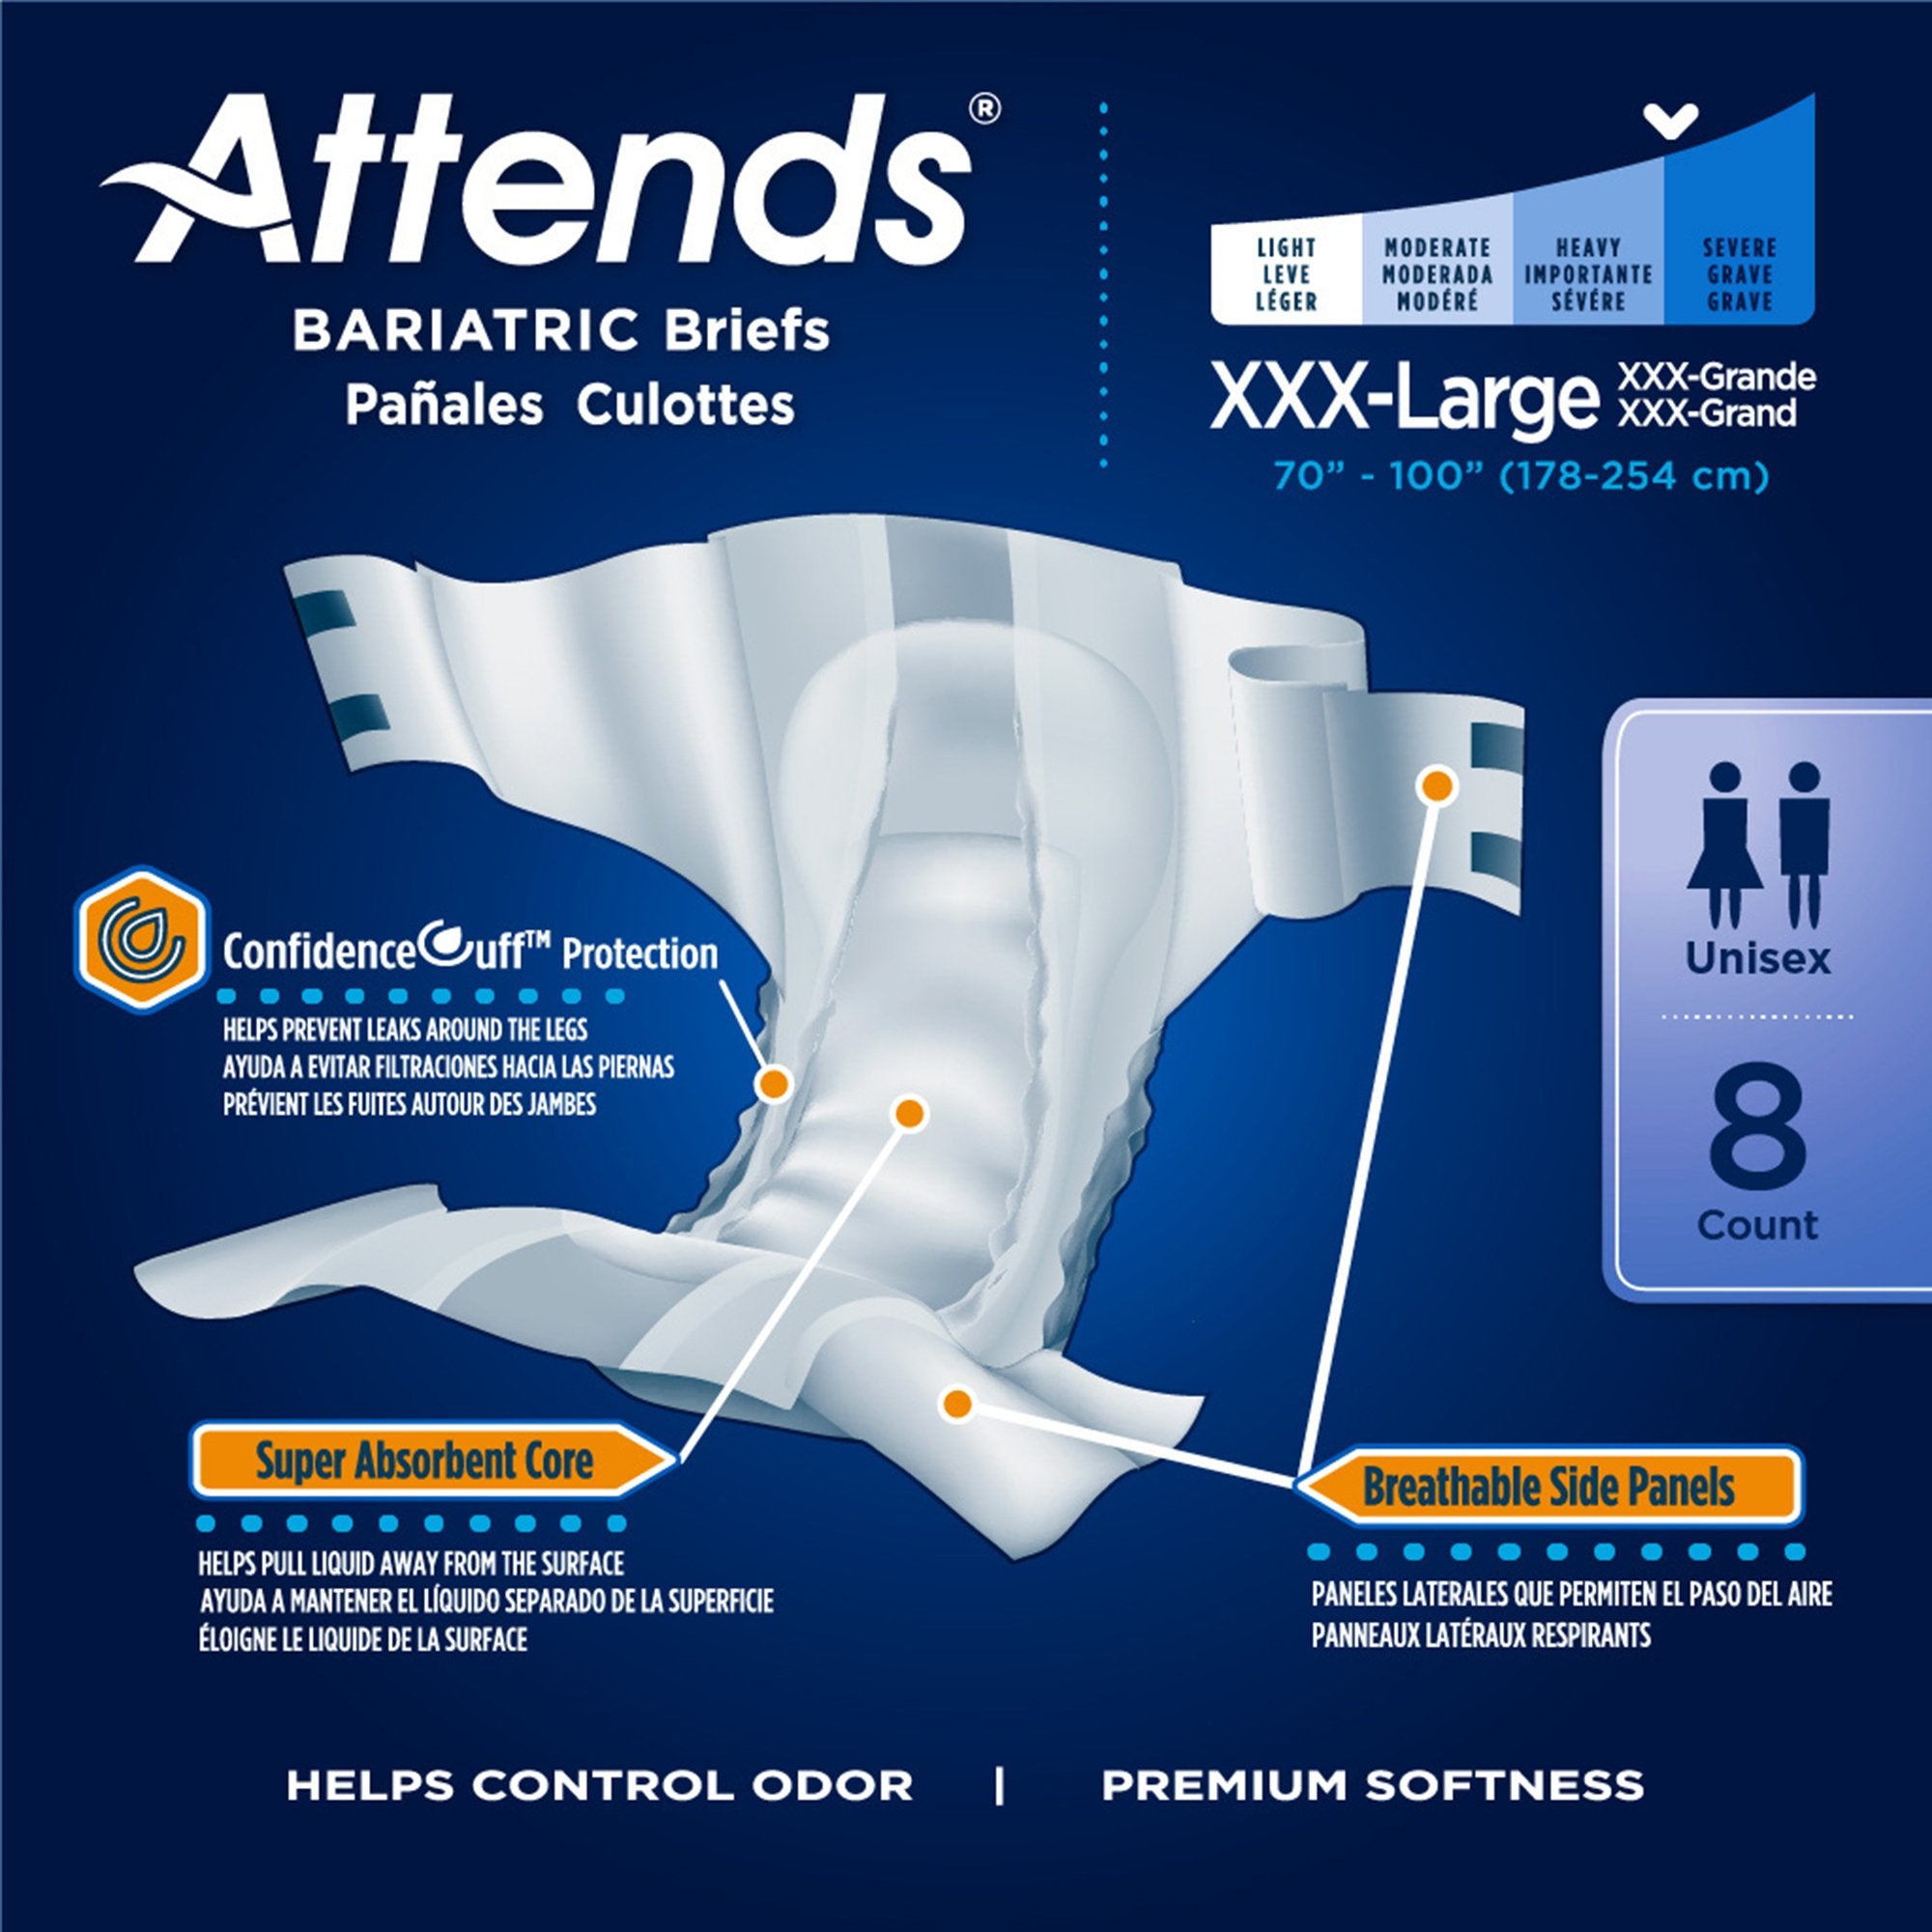 Attends® Bariatric Briefs 3XL - Heavy Absorbency Adult Incontinence Care